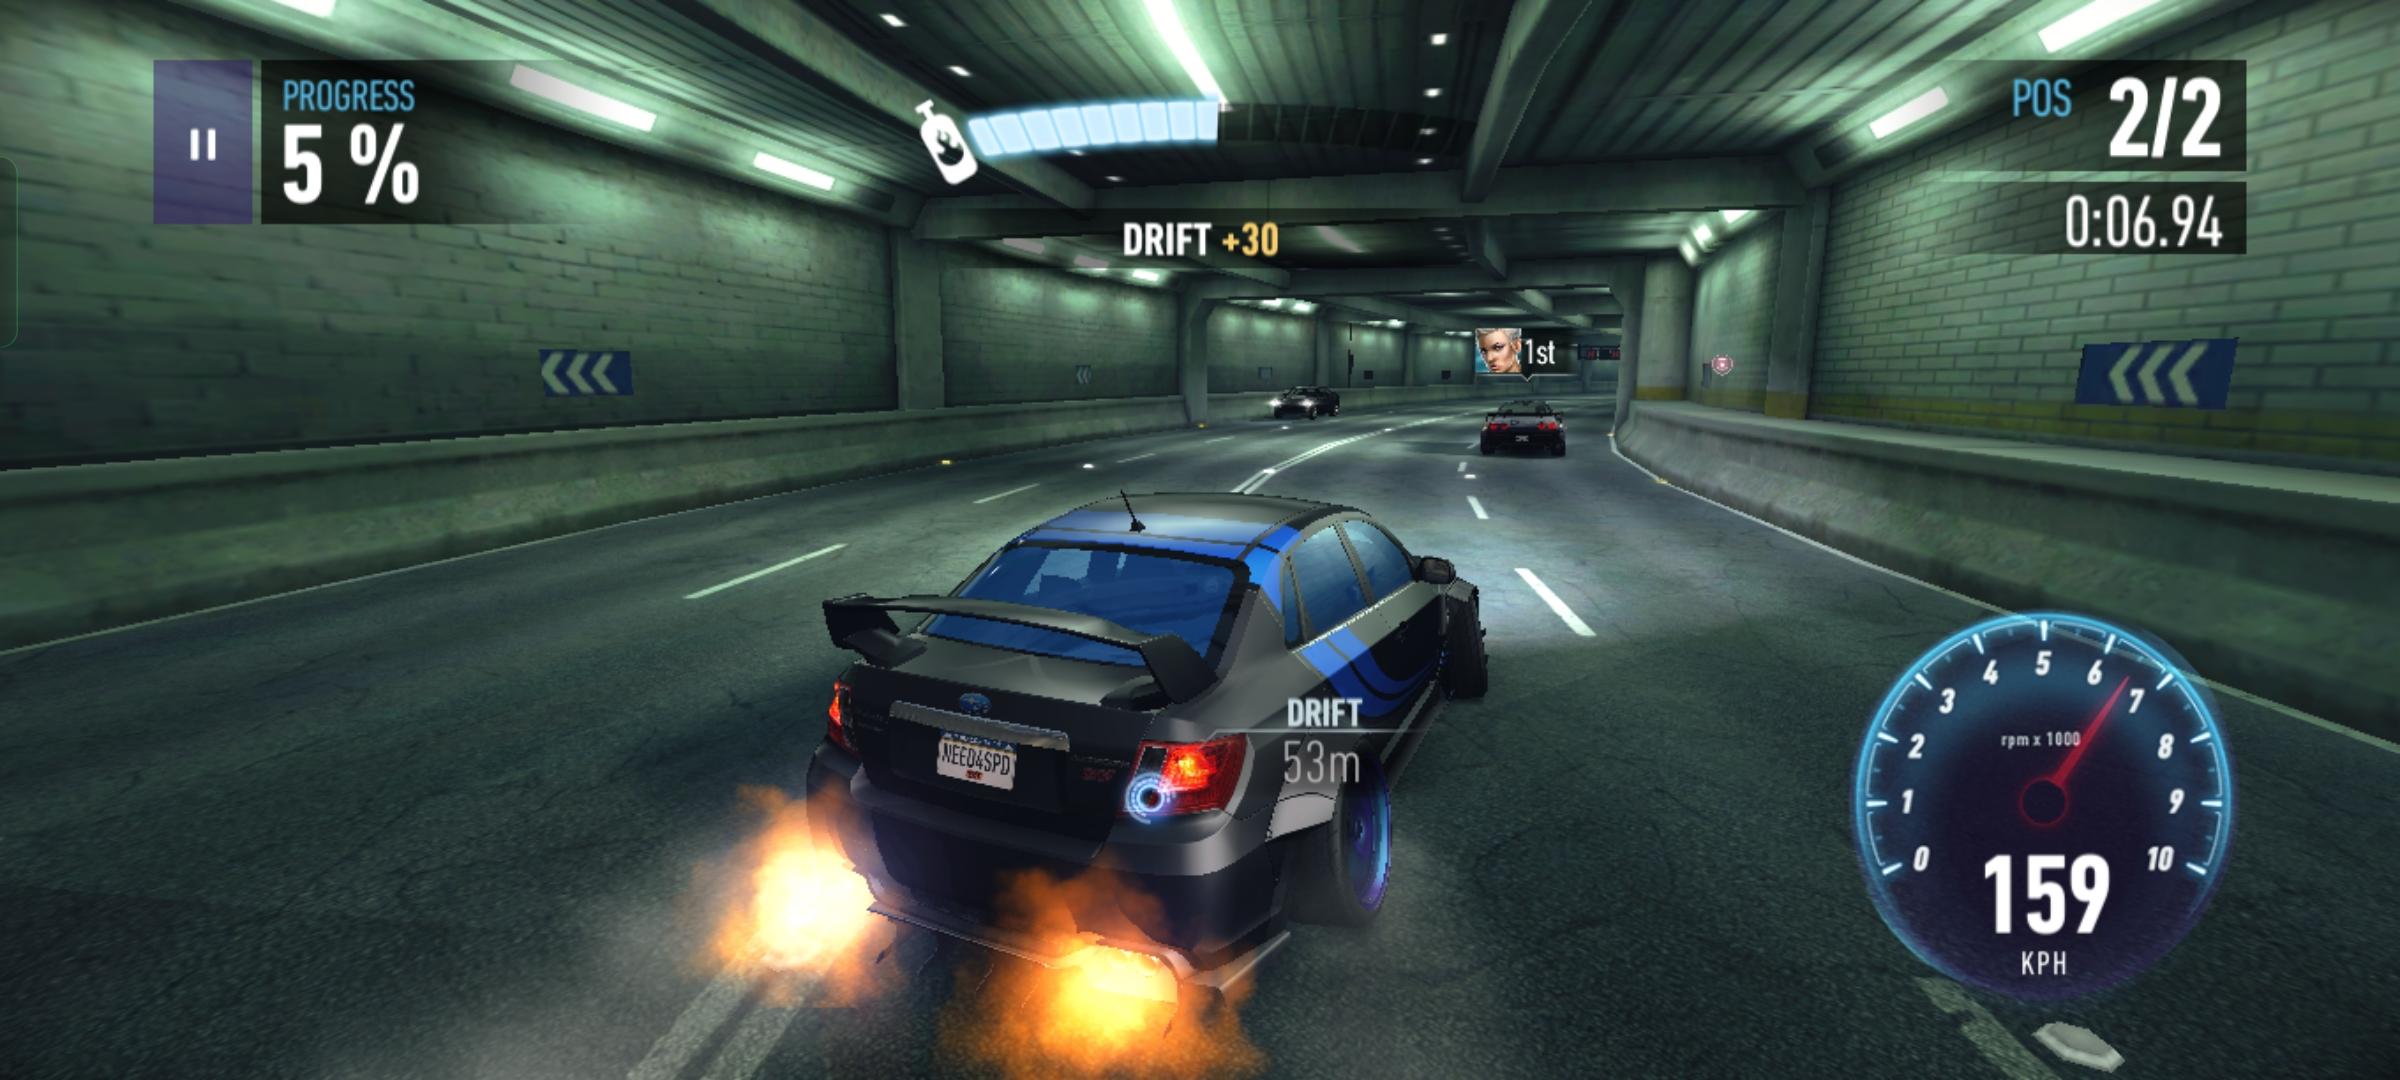 SaturdaySpecial: 7 awesome car racing video games of all time 